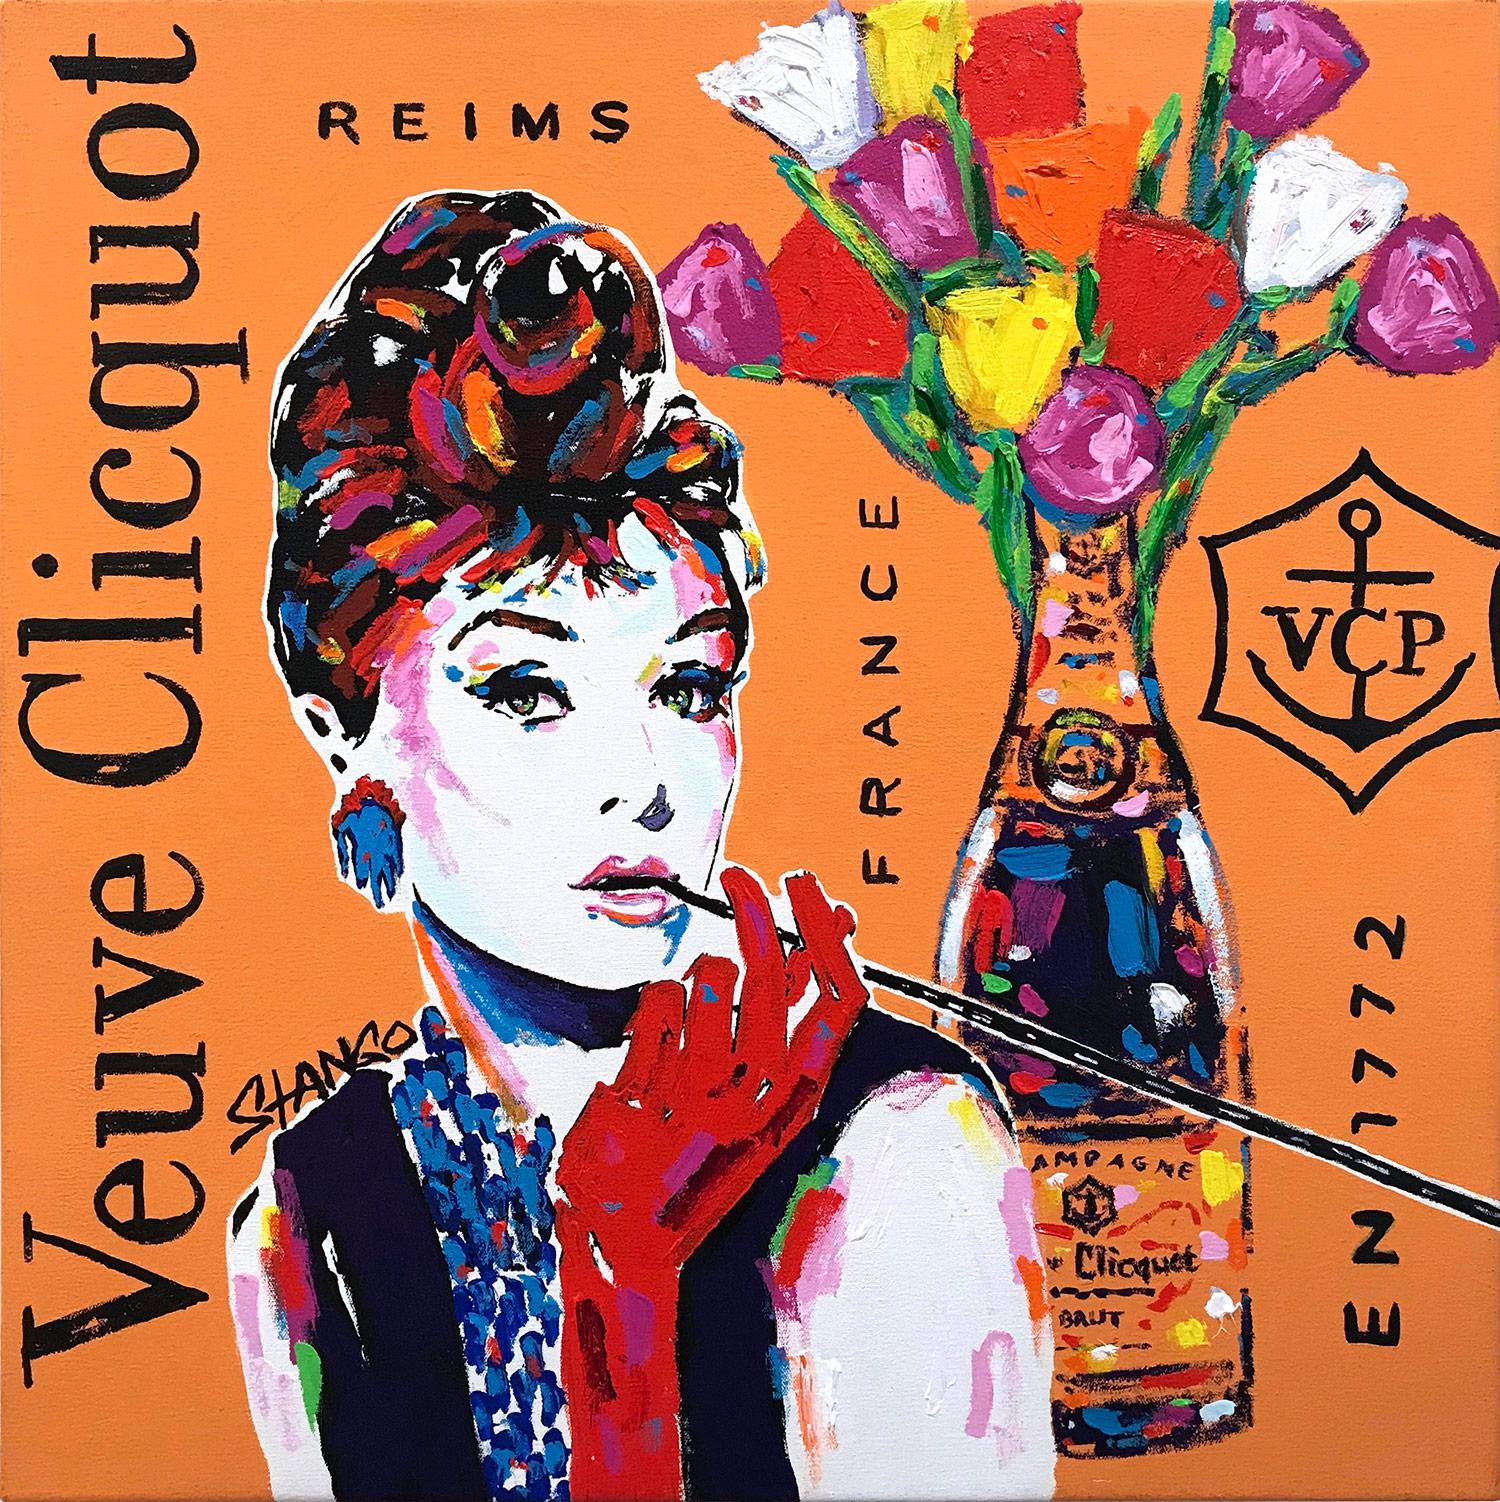 John Stango - A Little Silver Audrey Hepburn and Chanel No5 Pop Art  Acrylic Painting on Canvas